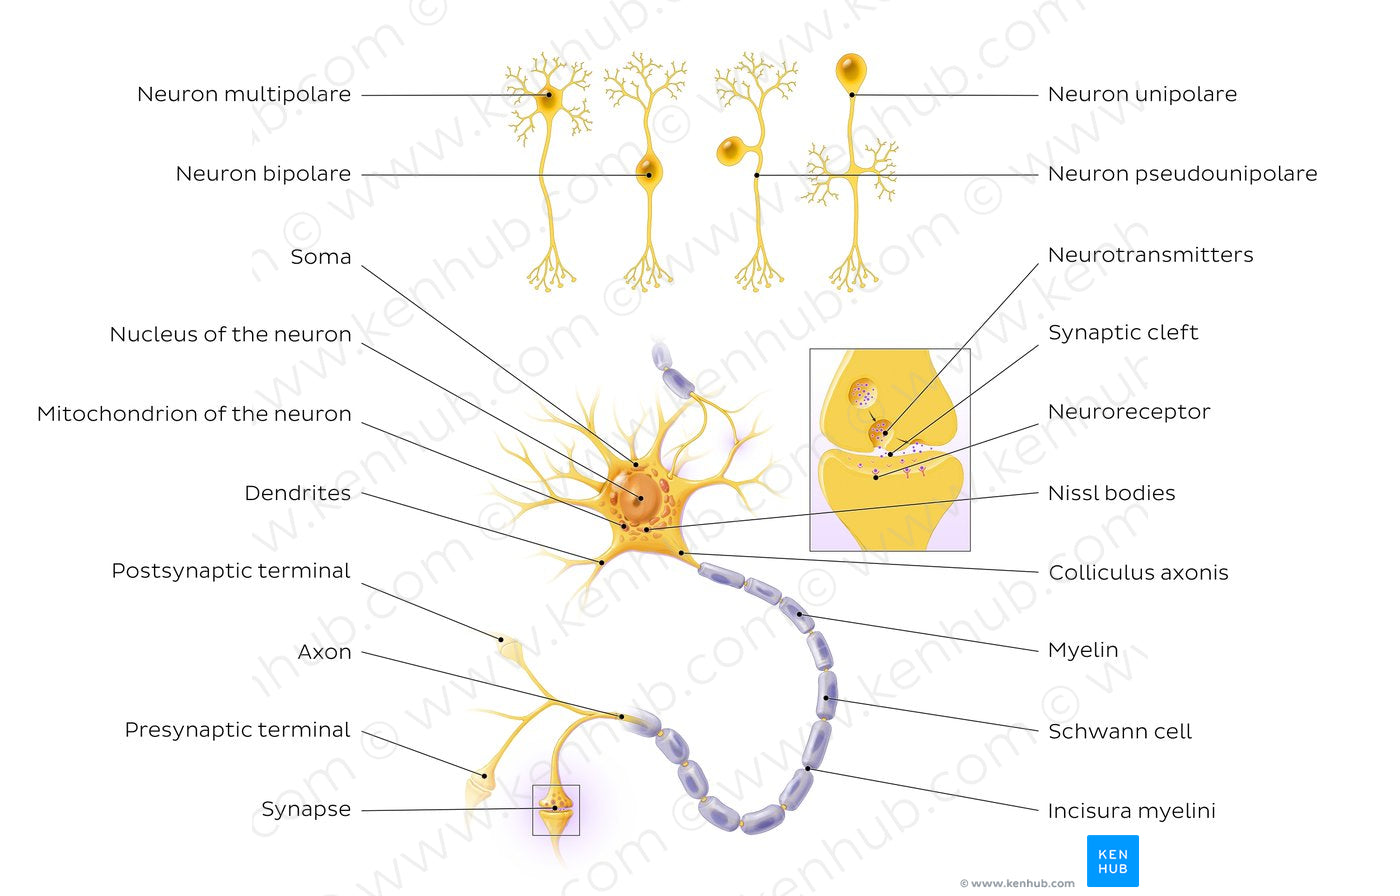 Neurons: Structure and types (Latin)